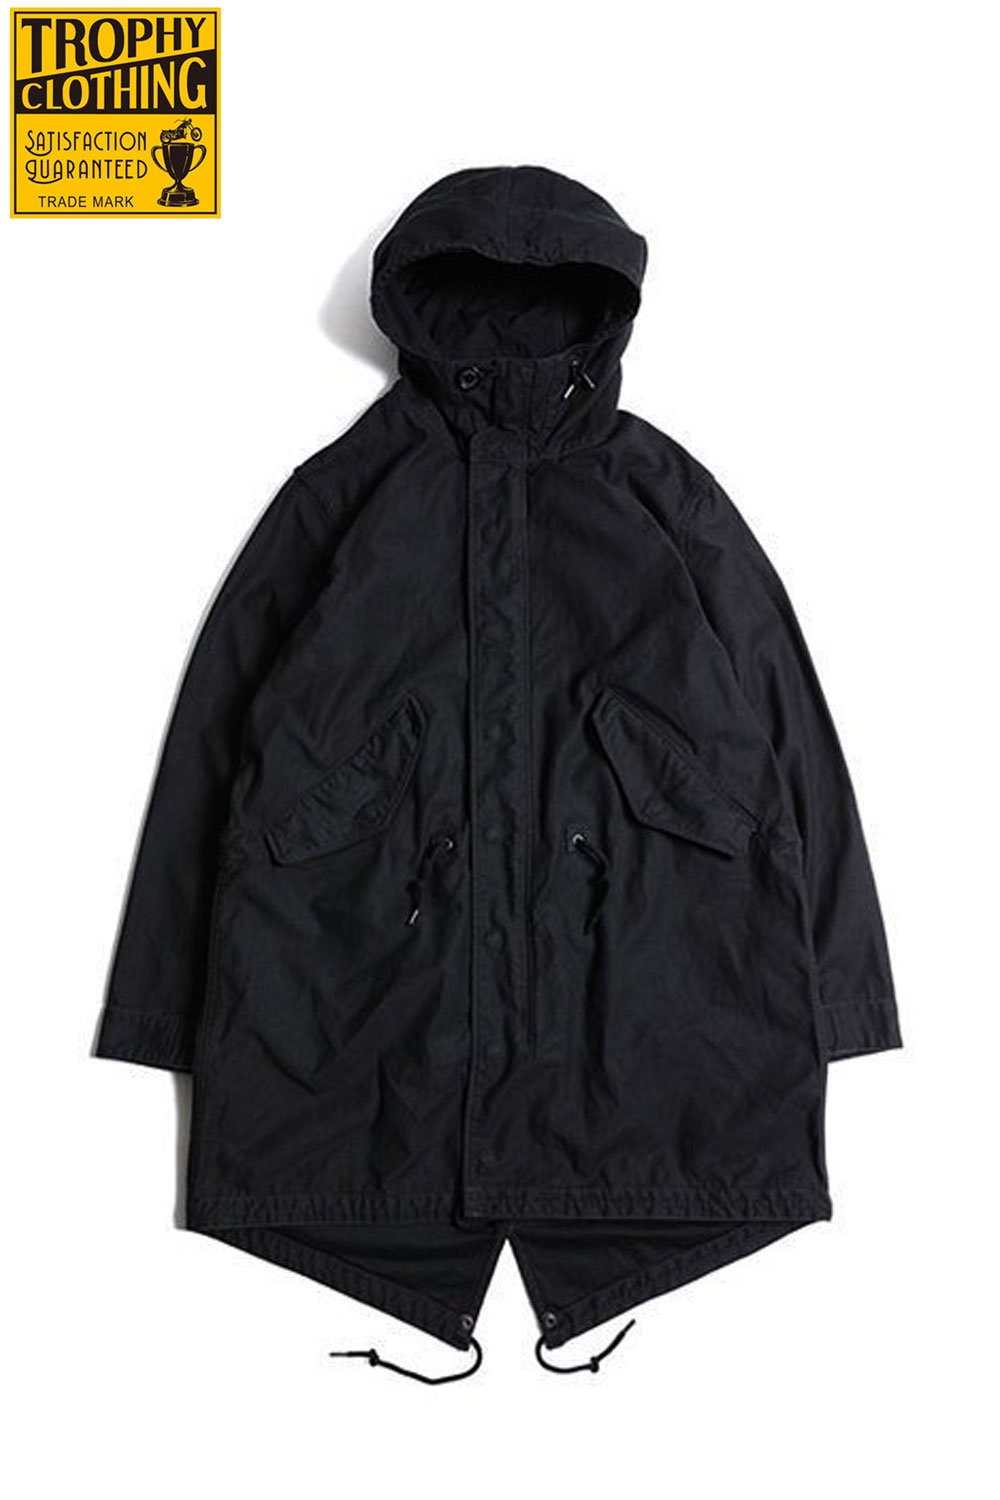 TROPHY CLOTHING(トロフィークロージング) ミリタリージャケット M-48 TR.MFG. FISHTAIL PARKA  TR22AW-507 通販正規取扱 | ハーレムストア公式通販サイト